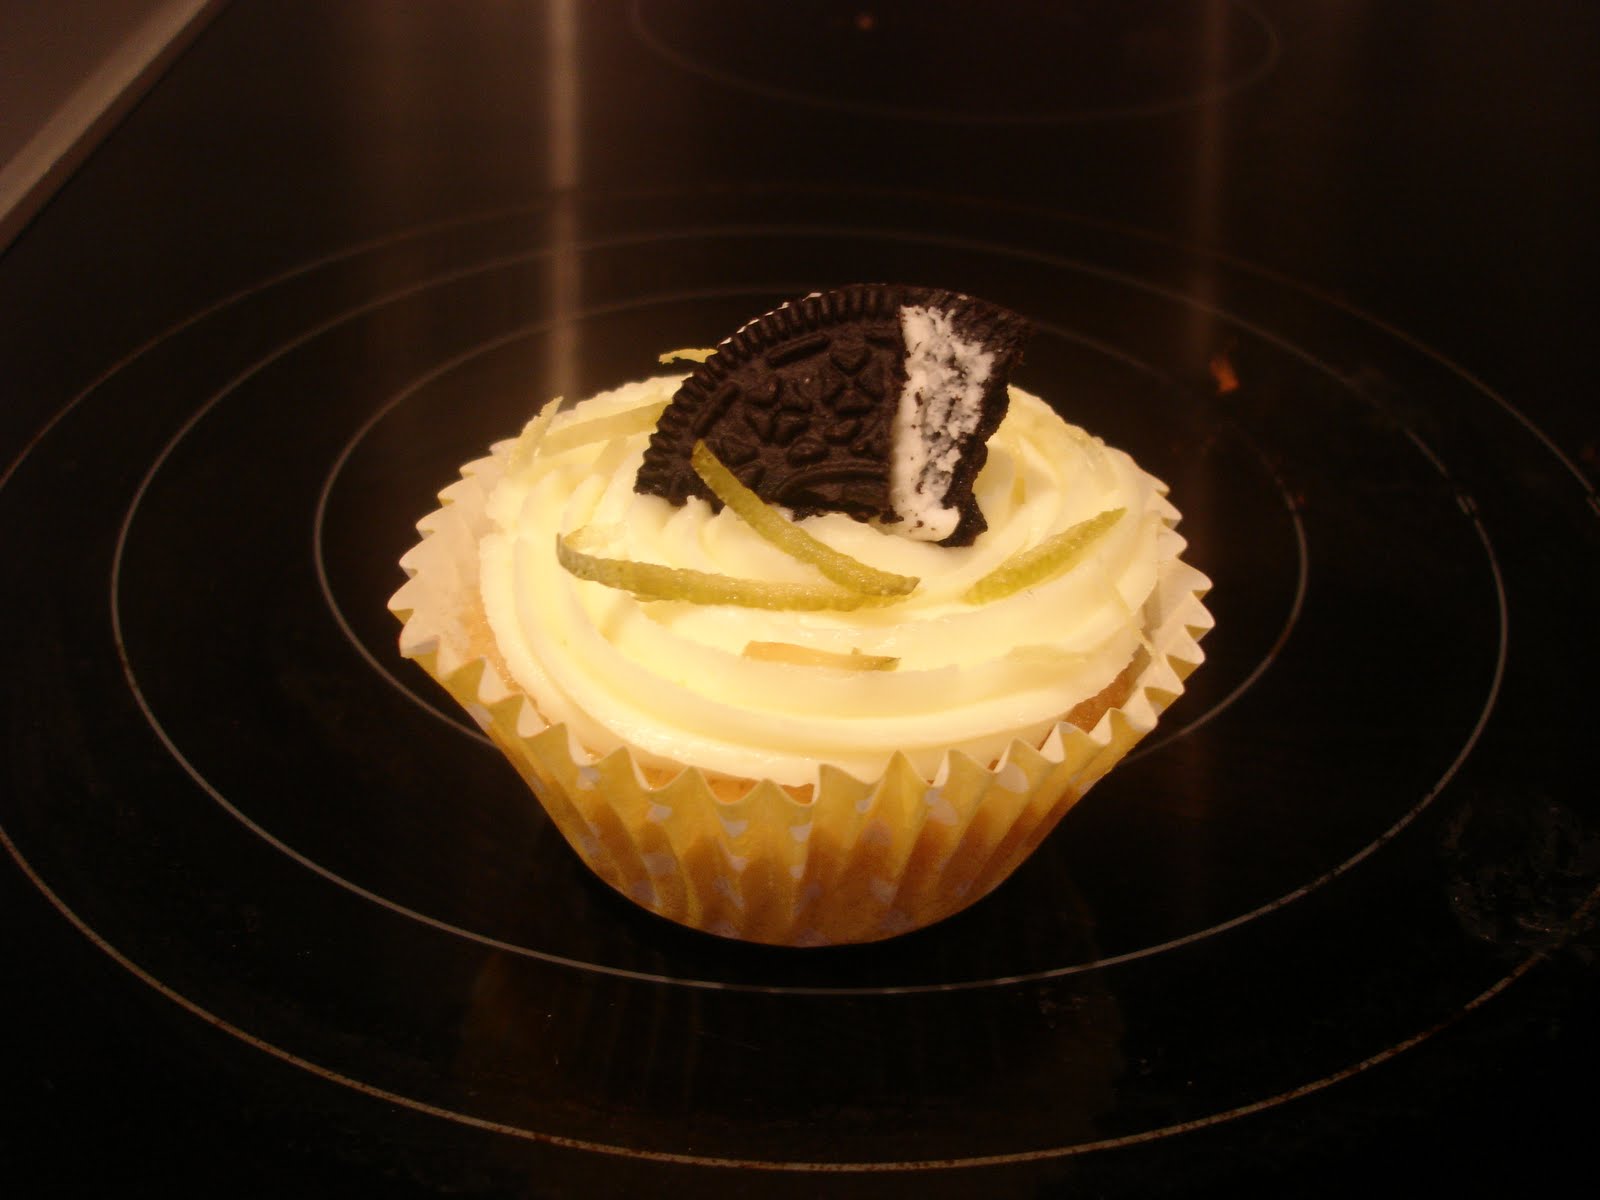 Tamara made a Lemon and Lime Cupcake. The flavor was amazing! Her day ...